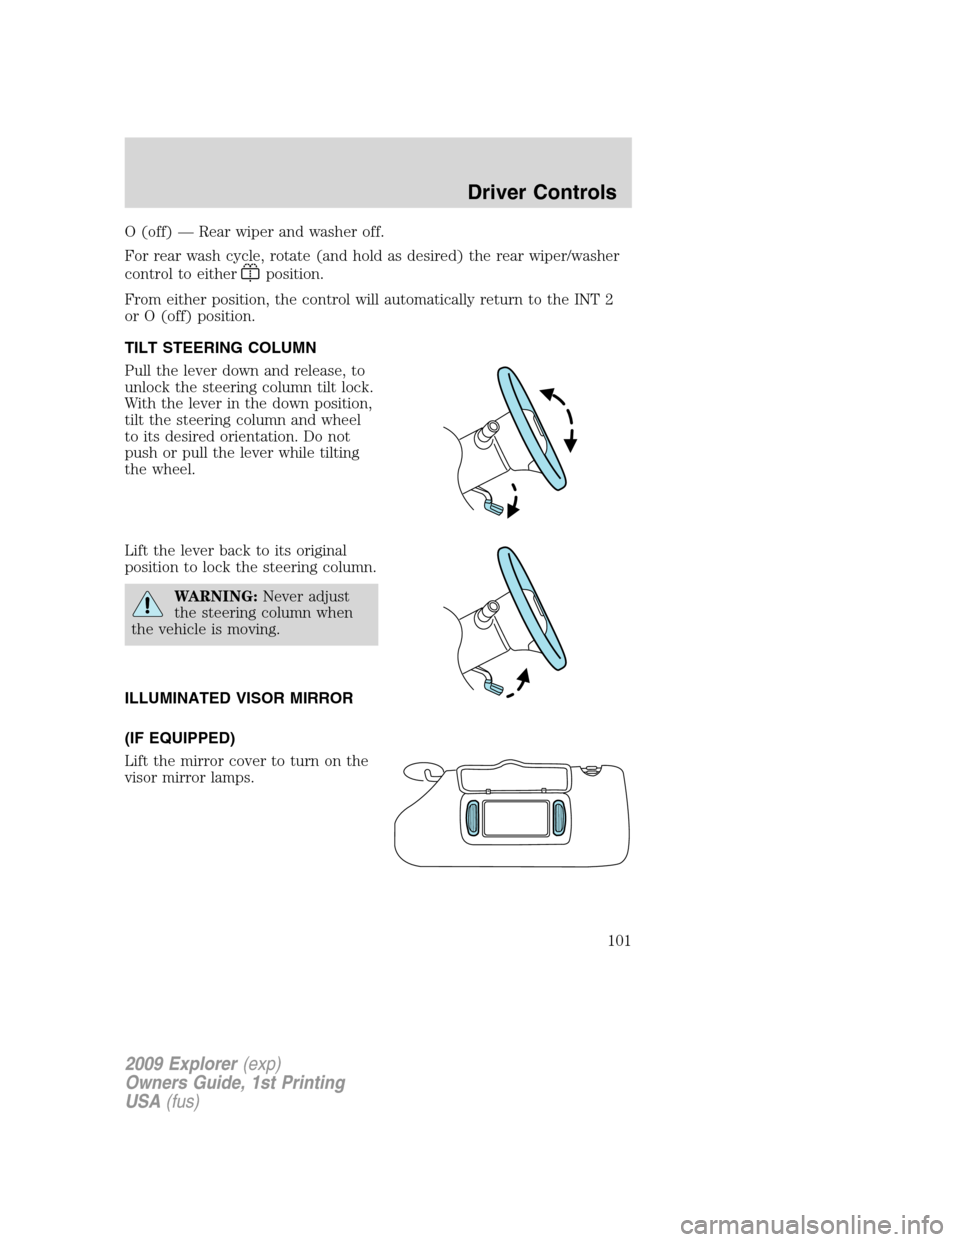 FORD EXPLORER 2009 4.G Owners Manual O (off) — Rear wiper and washer off.
For rear wash cycle, rotate (and hold as desired) the rear wiper/washer
control to either
position.
From either position, the control will automatically return t